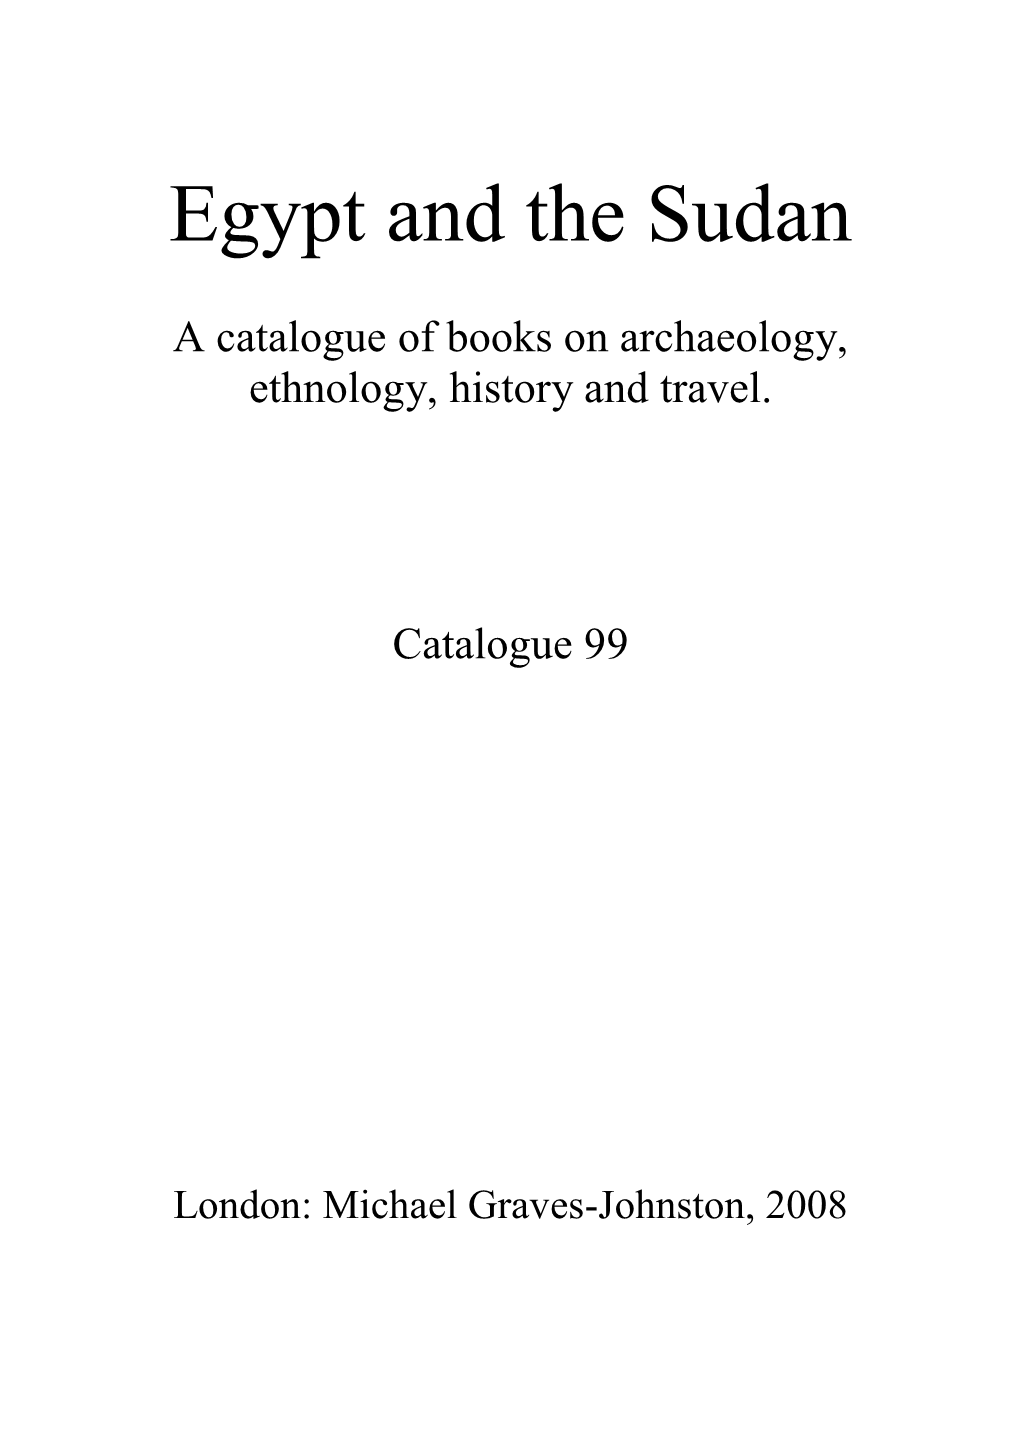 Egypt and the Sudan Catalogue 99